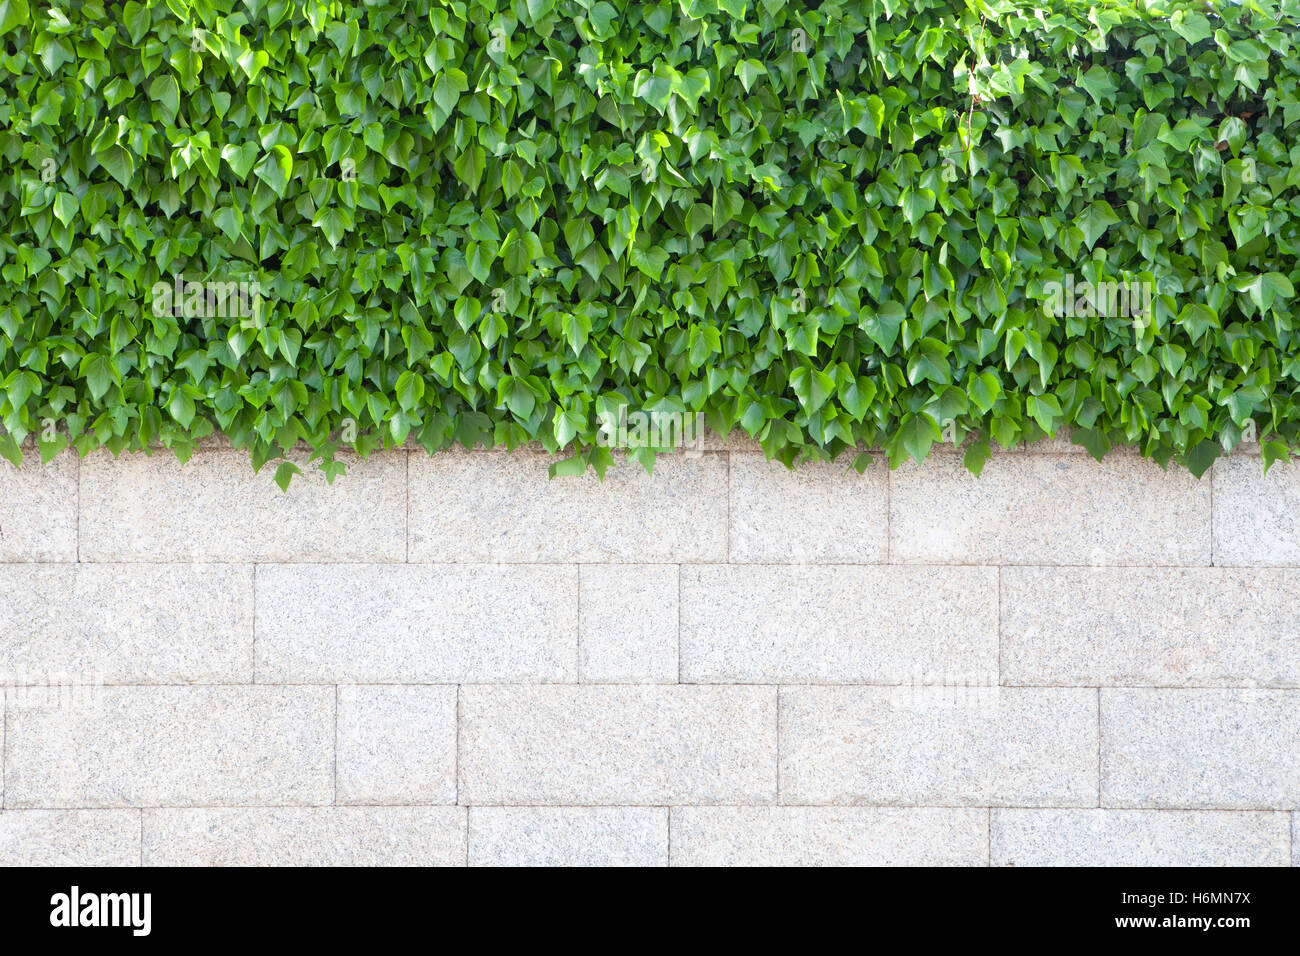 Outer wall of house covered with beautiful green leaves plants Stock Photo